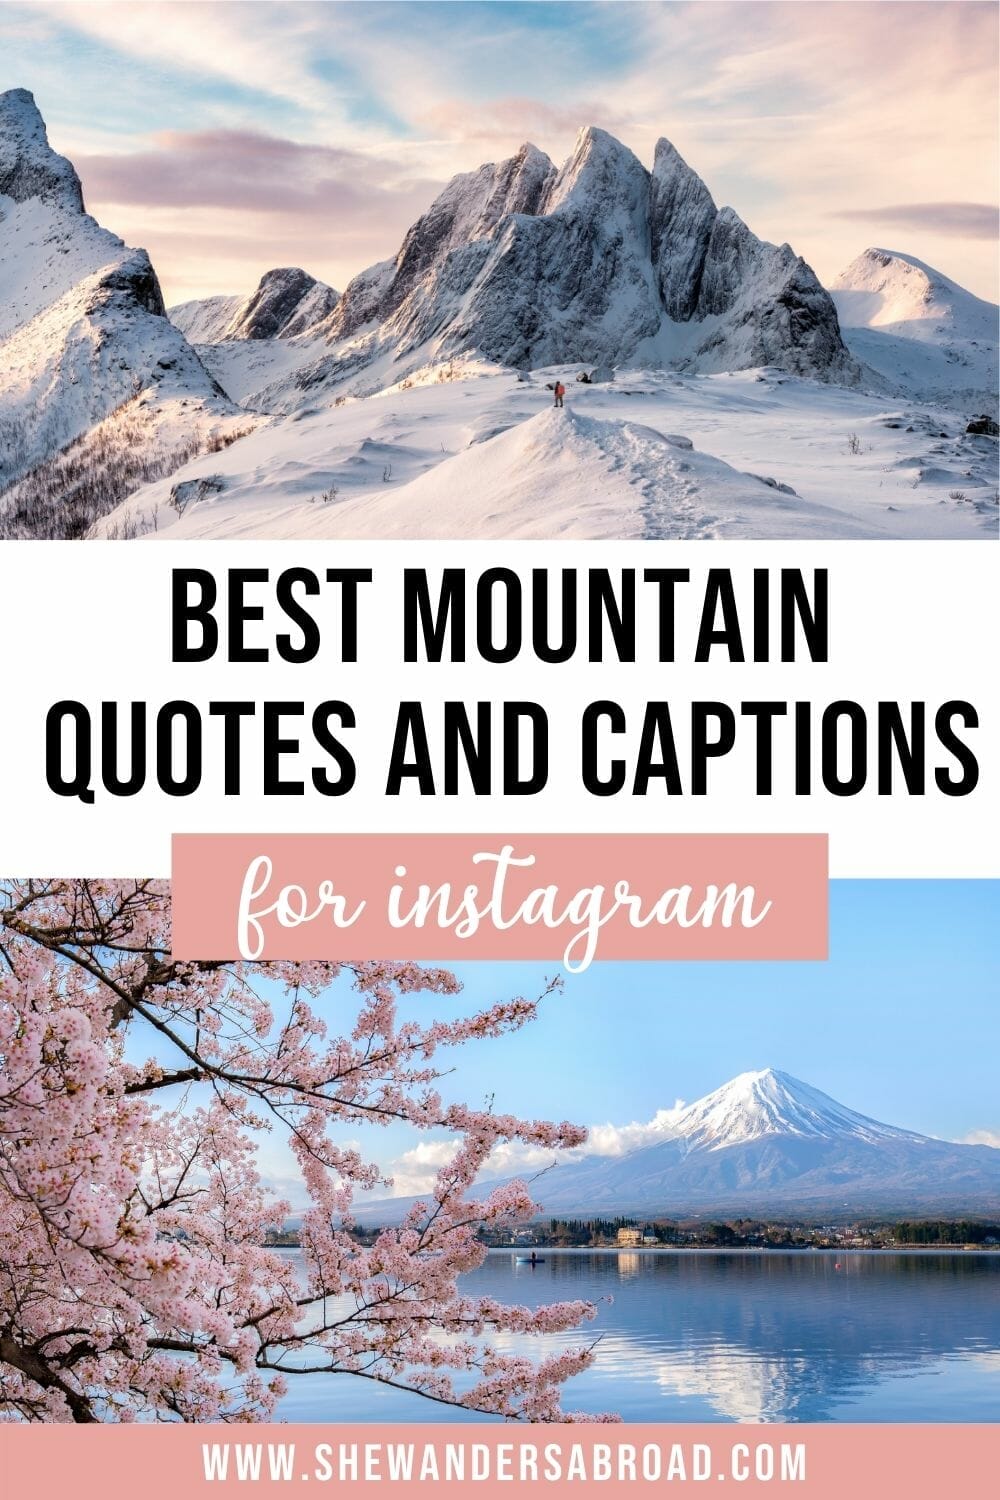 Amazing Mountain Captions for Instagram (Quotes, Puns and More!)